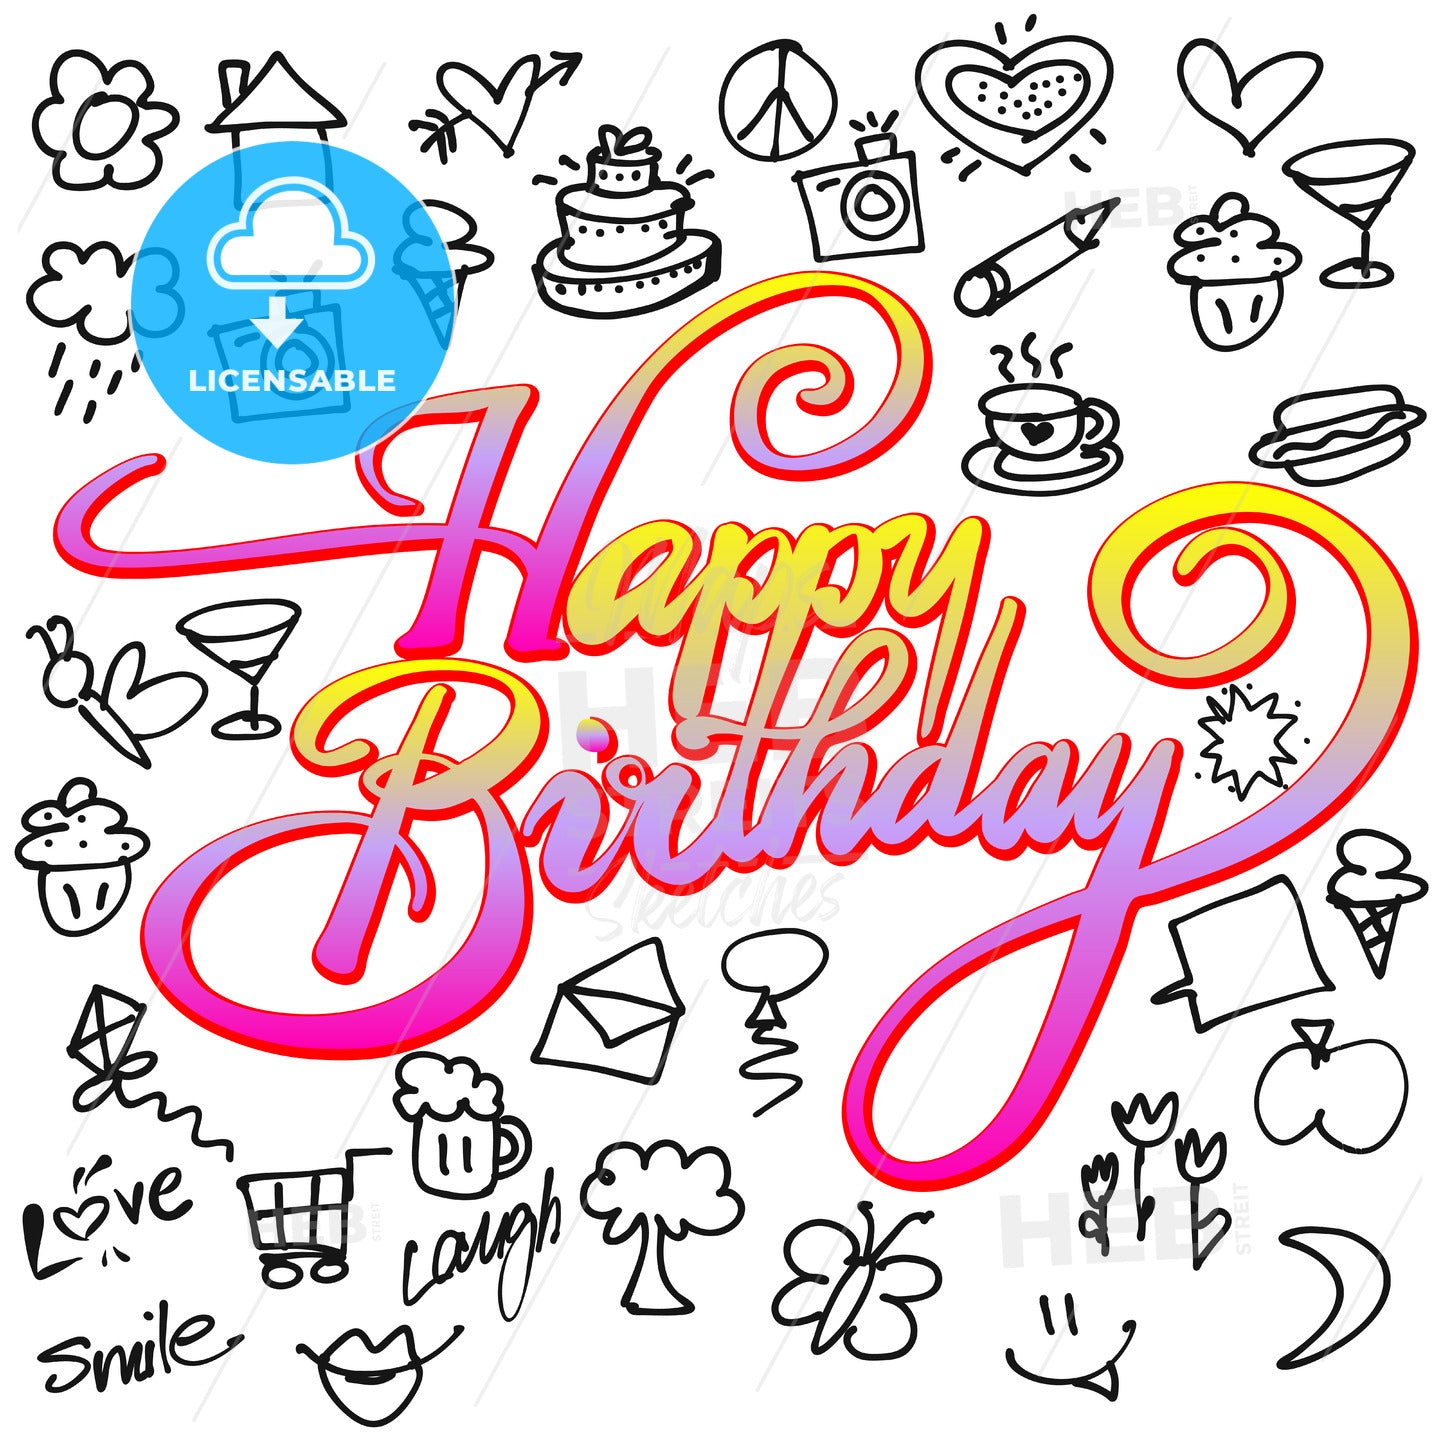 Happy birthday Icons and Doodles – instant download